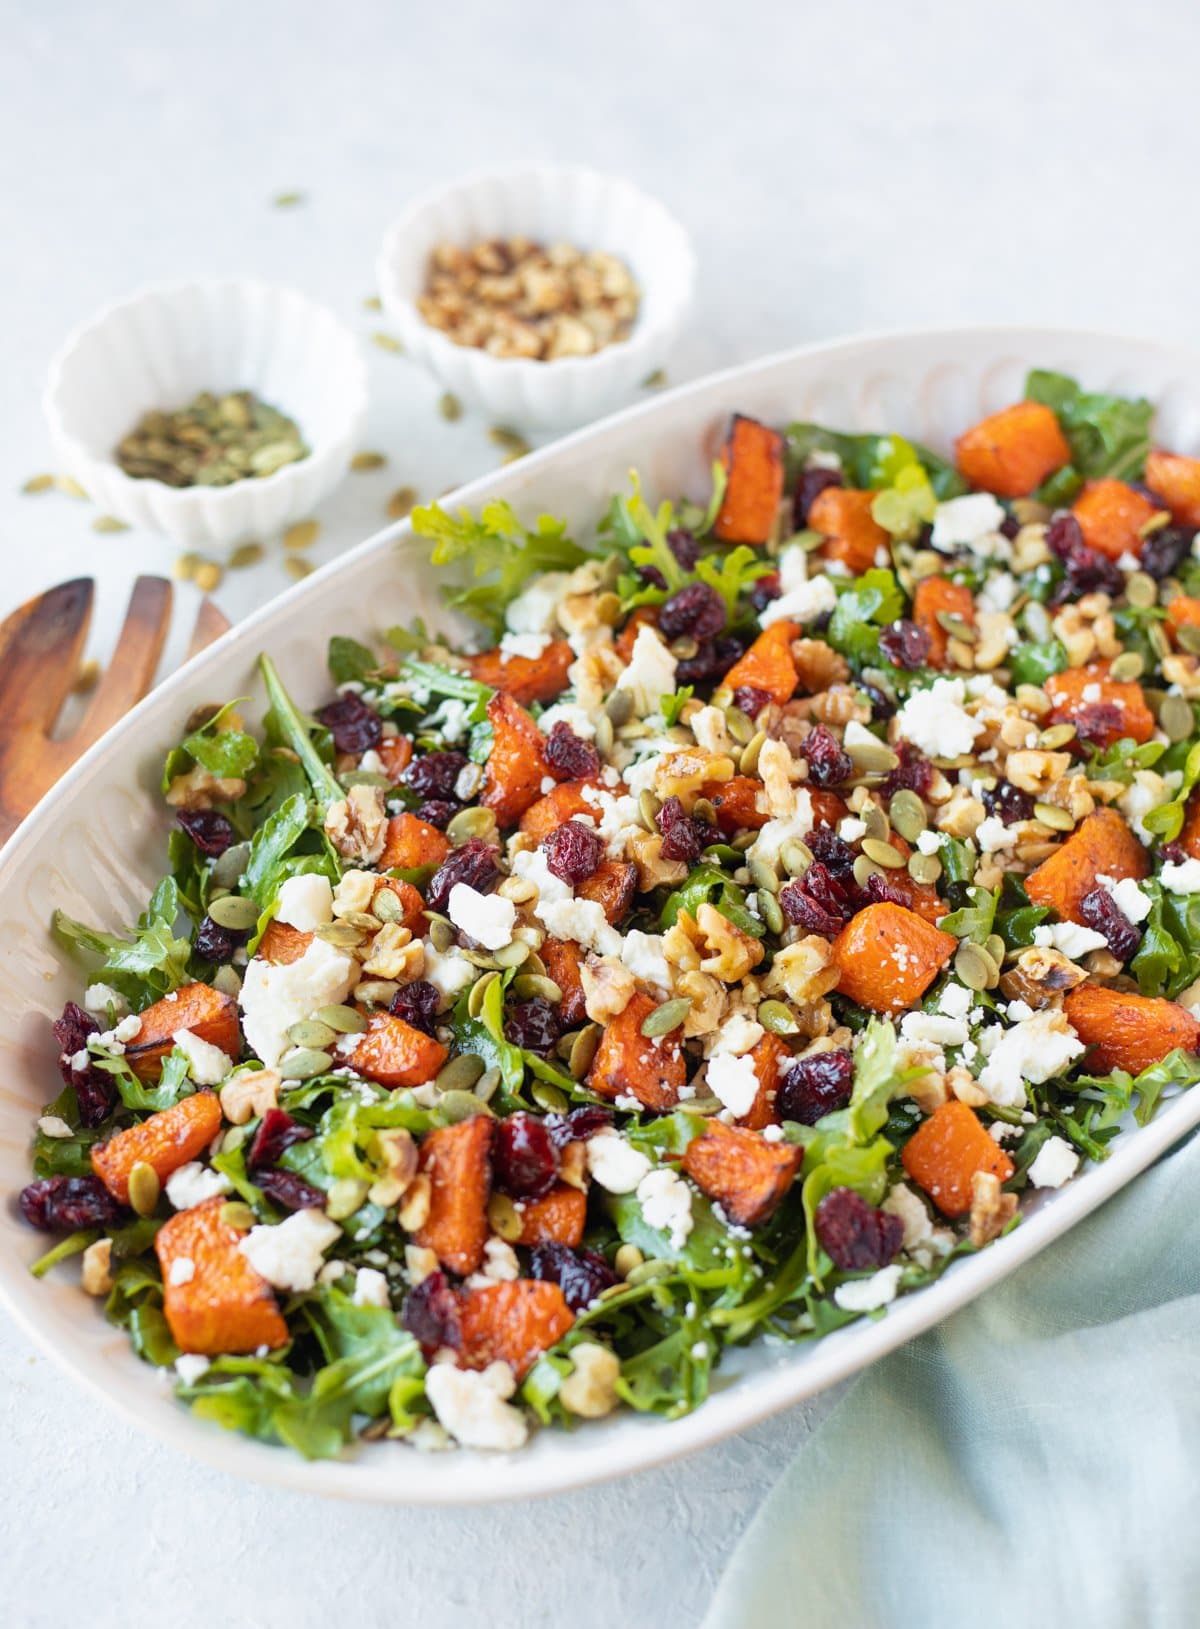 Roasted pumpkin salad with feta and walnuts served in a platter